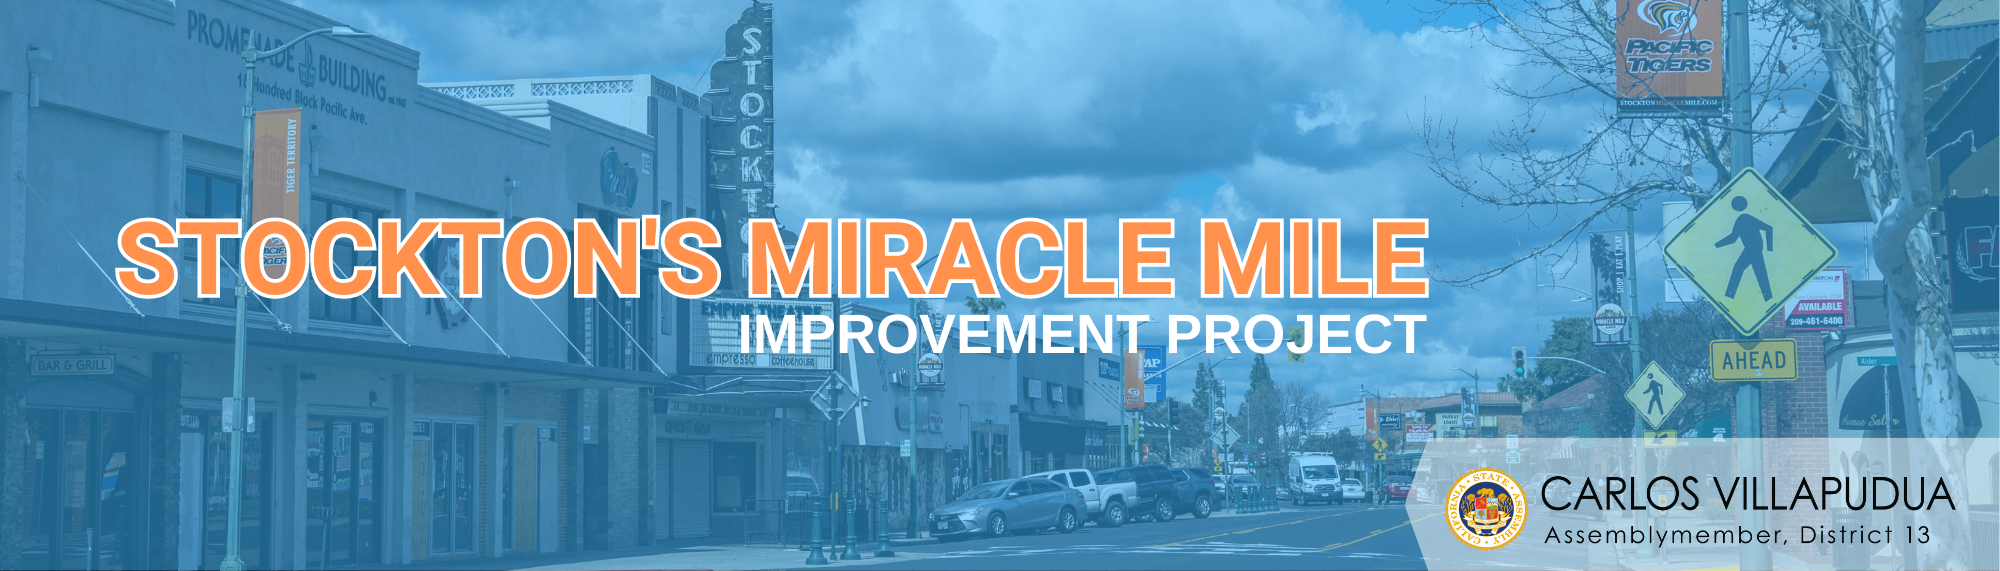 City Street with blue overlay. Orange Text: STOCKTON'S MIRACLE MILE. White text: IMPROVEMENT PROJECT